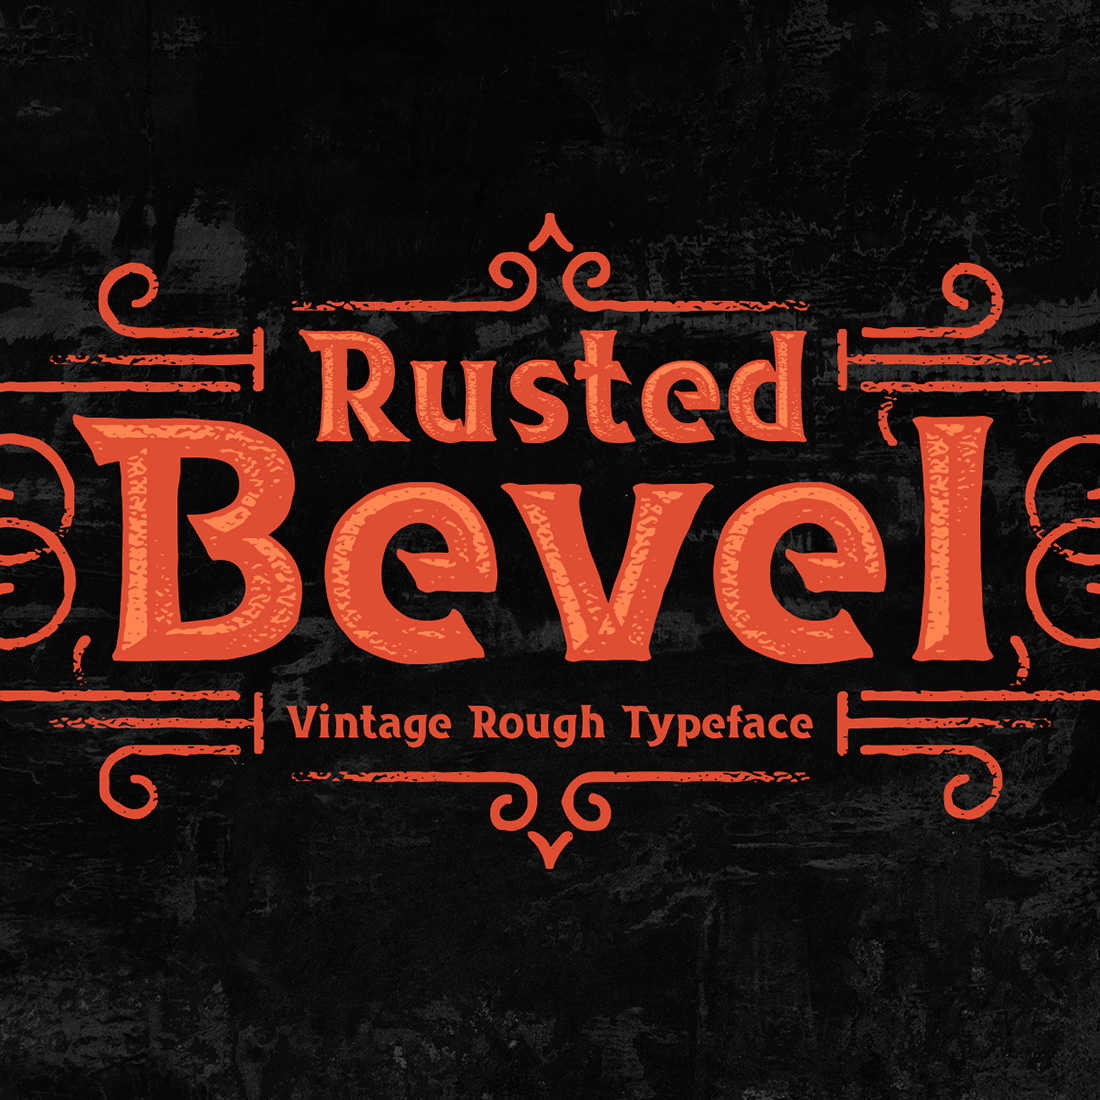 Rusted Bevel Typeface main cover.